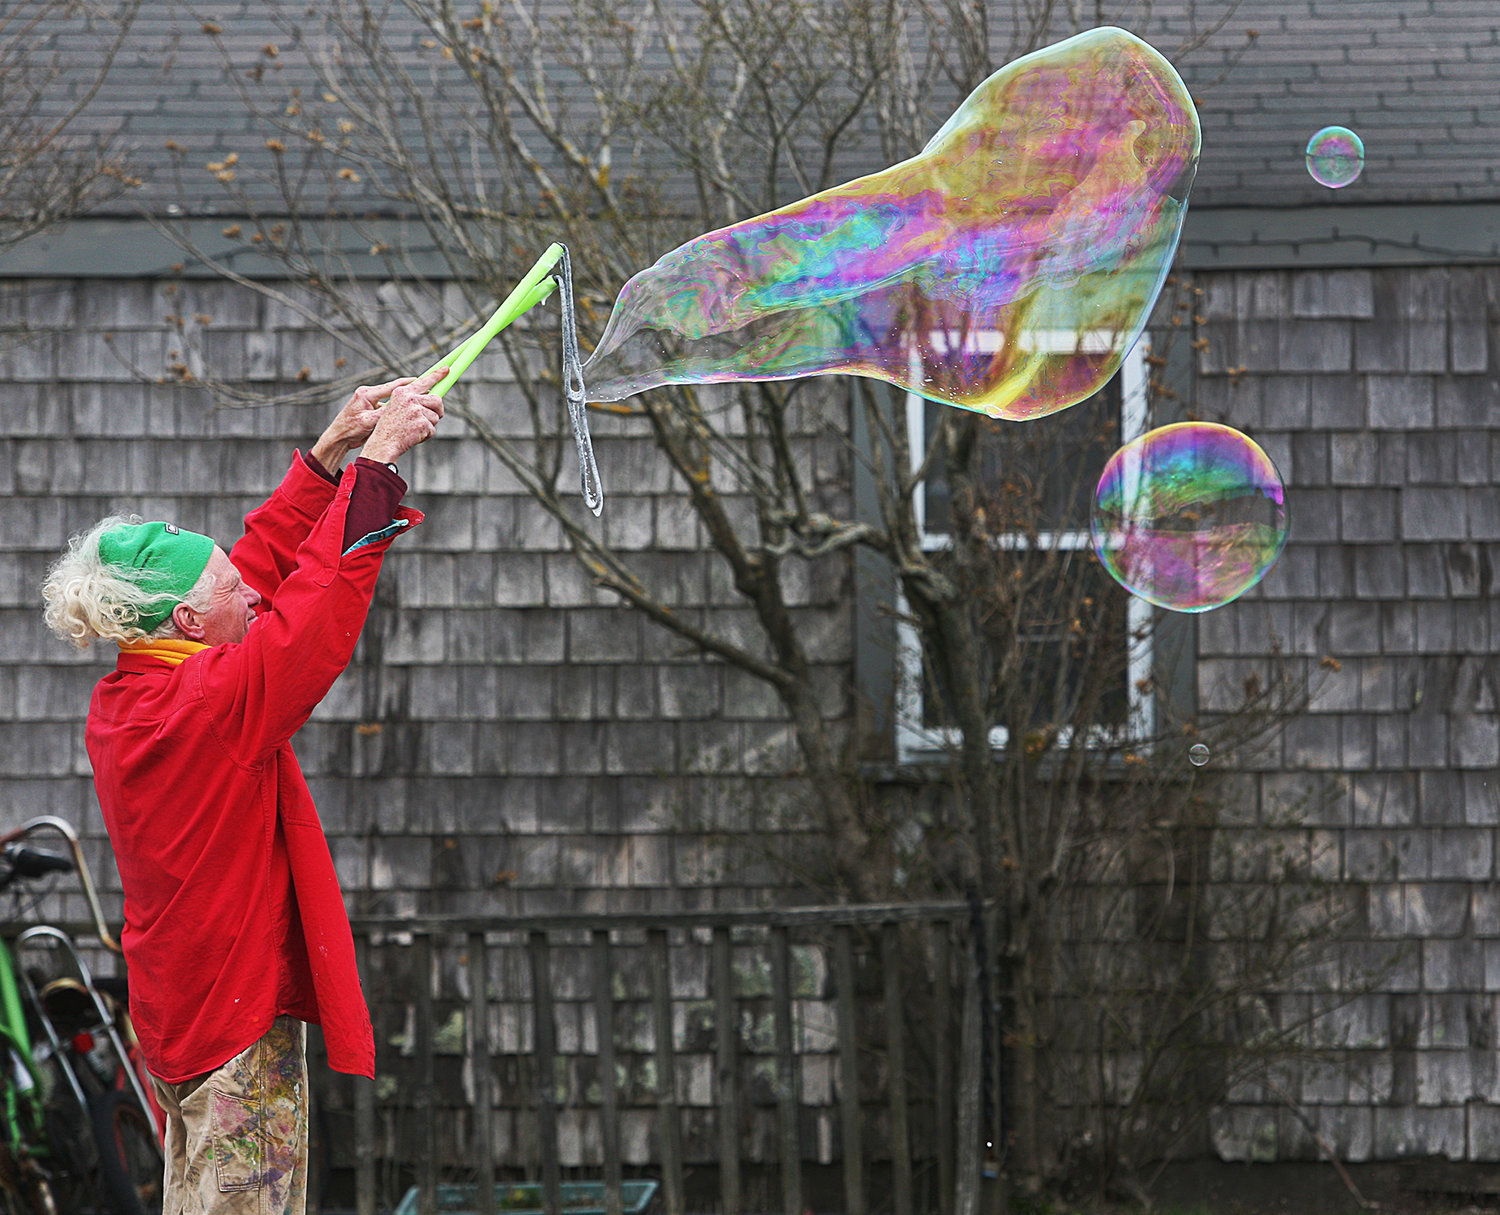 Nantucket artist Matthew Oates creates large bubbles on an early Spring Saturday at the corner of Washington and Francis streets. Oates watched the bubbles drift over Washington Street toward the harbor, entertaining drivers on Washington Street. Oates said that doing this was "a destresser."